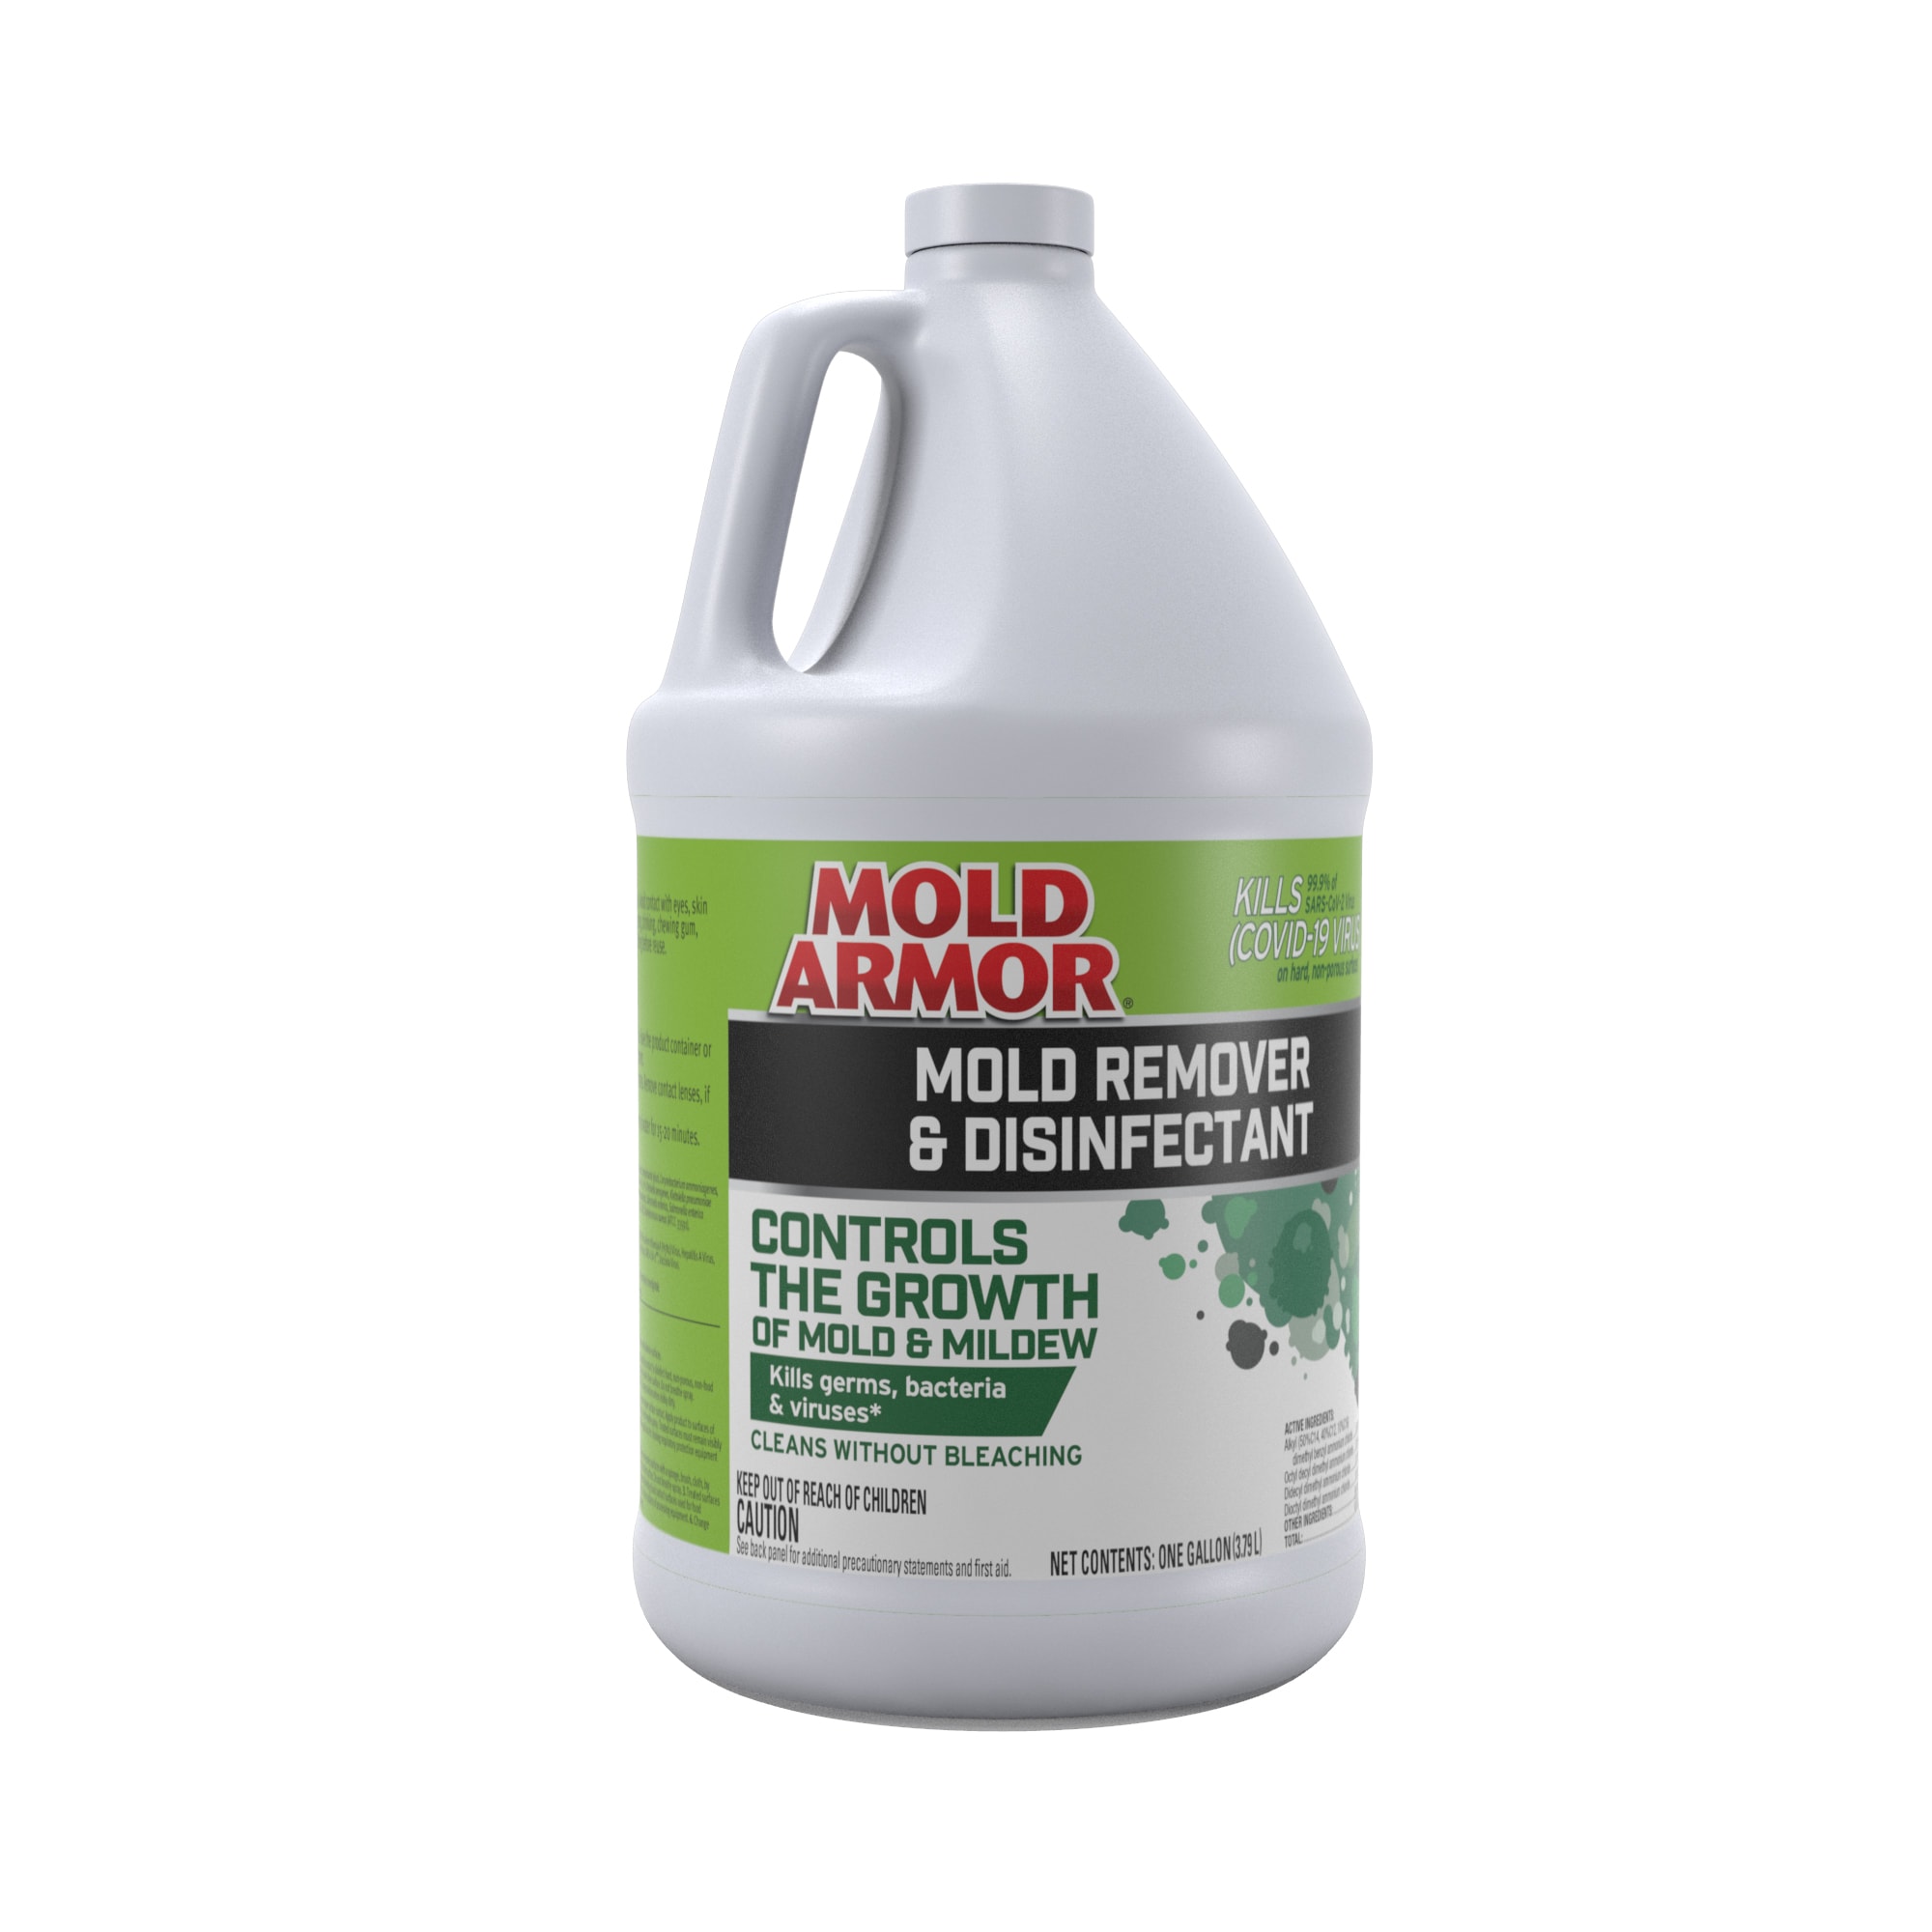 With all the moisture and rain, check out any nooks and crannies where  moisture got stuck. This Mold Armor kills mold, and helps prevent it…